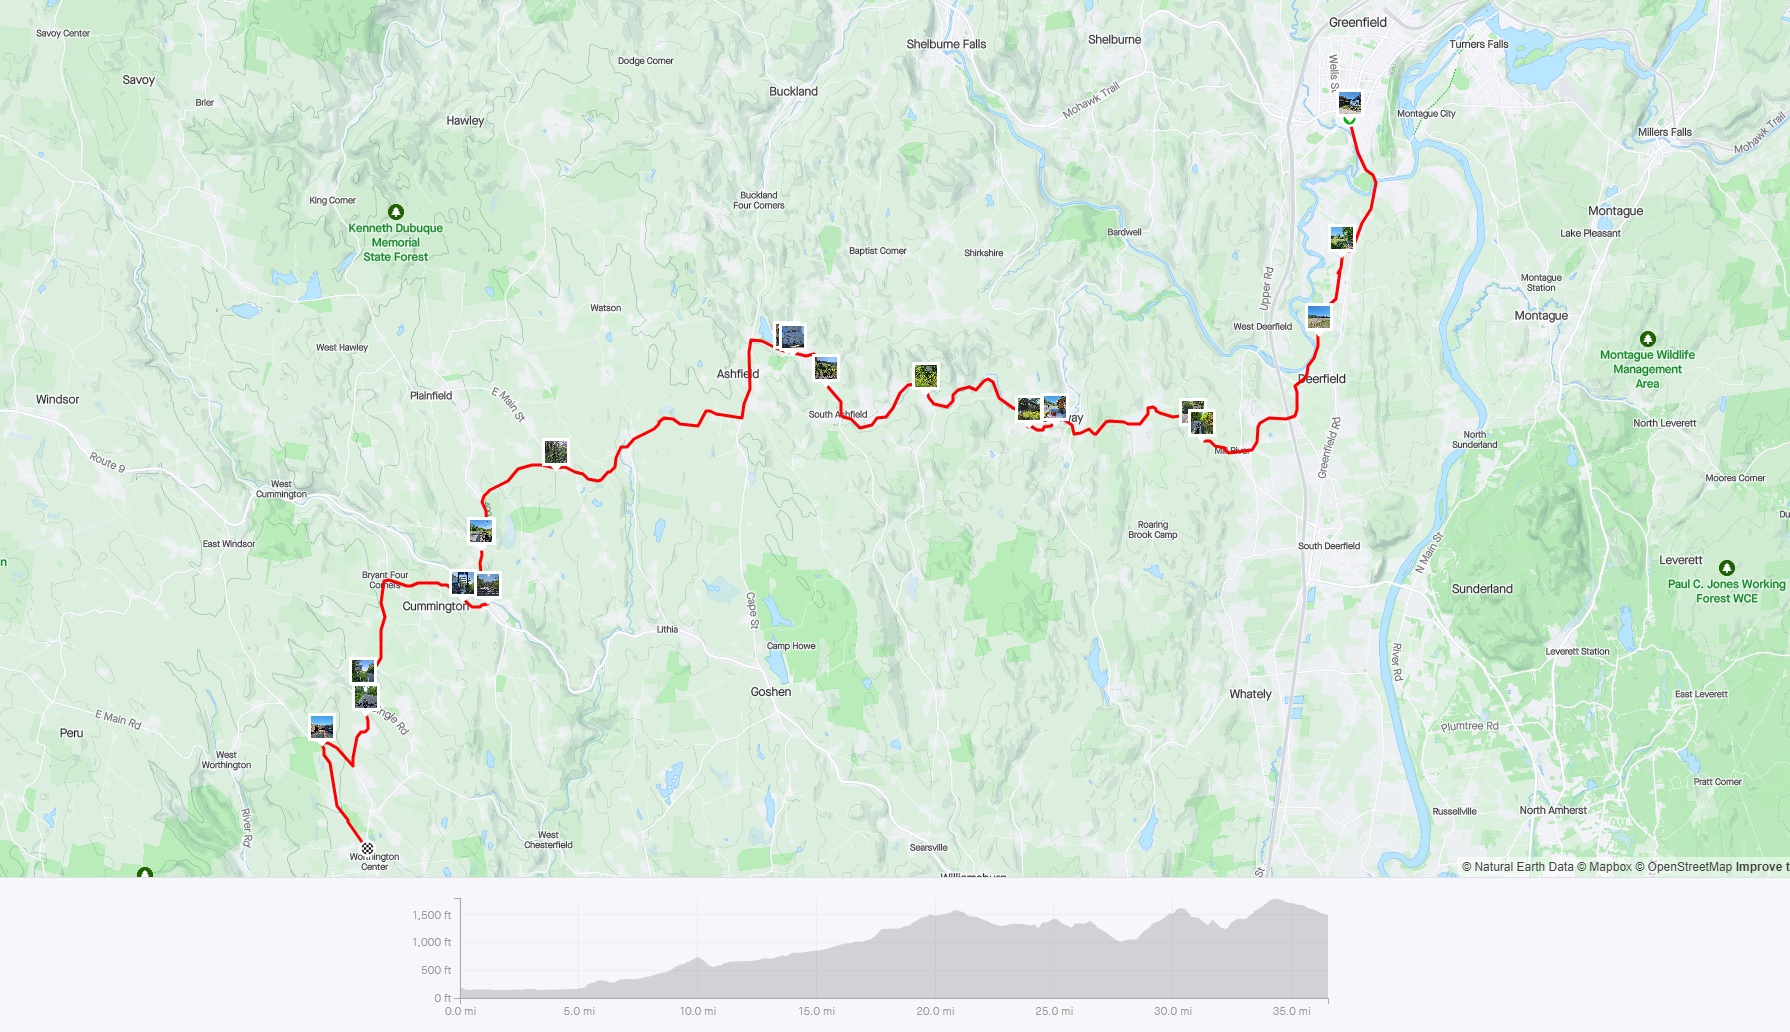 Strava Route Day 1 - Greenfield to Worthington